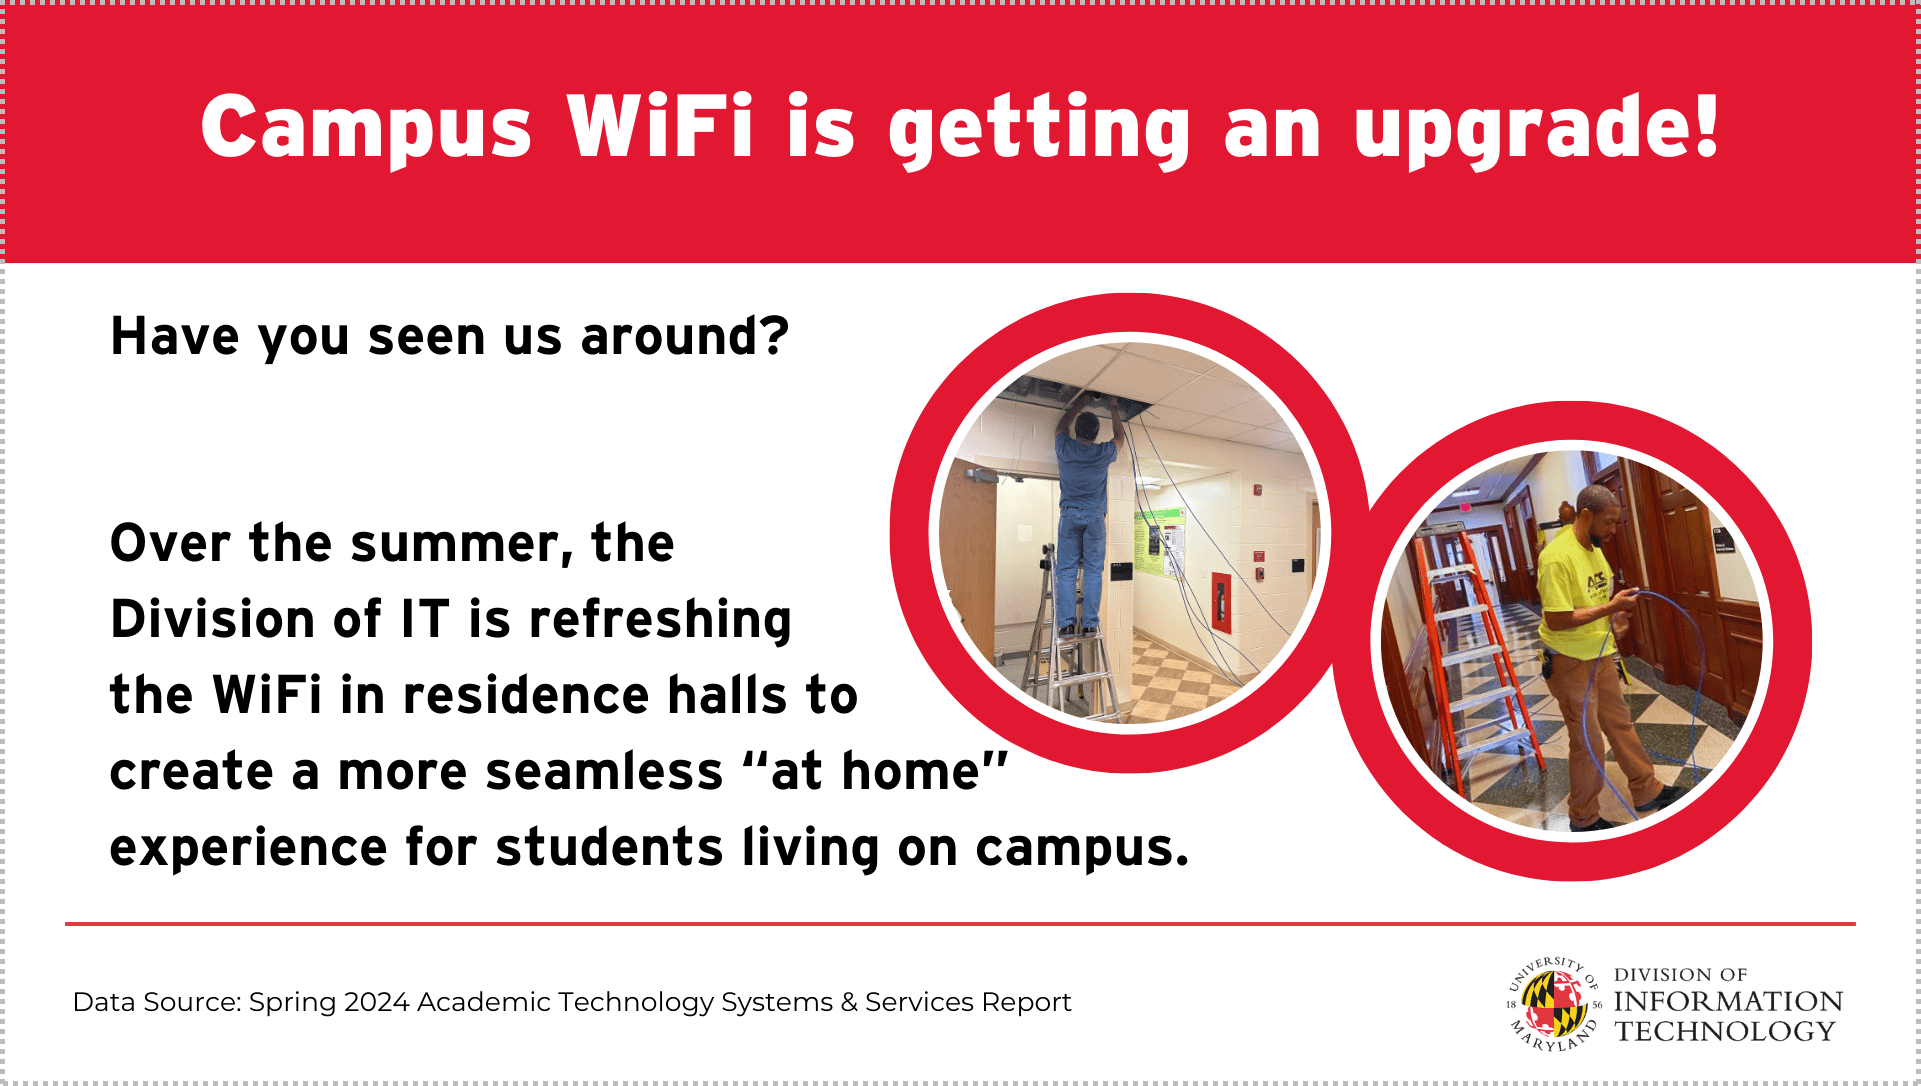 Campus WiFi is getting an upgrade! Have you seen us around? Over the summer, the Division of IT is refreshing the WiFi in residence halls to create a more seaamless "at home" experience for students living on campus.